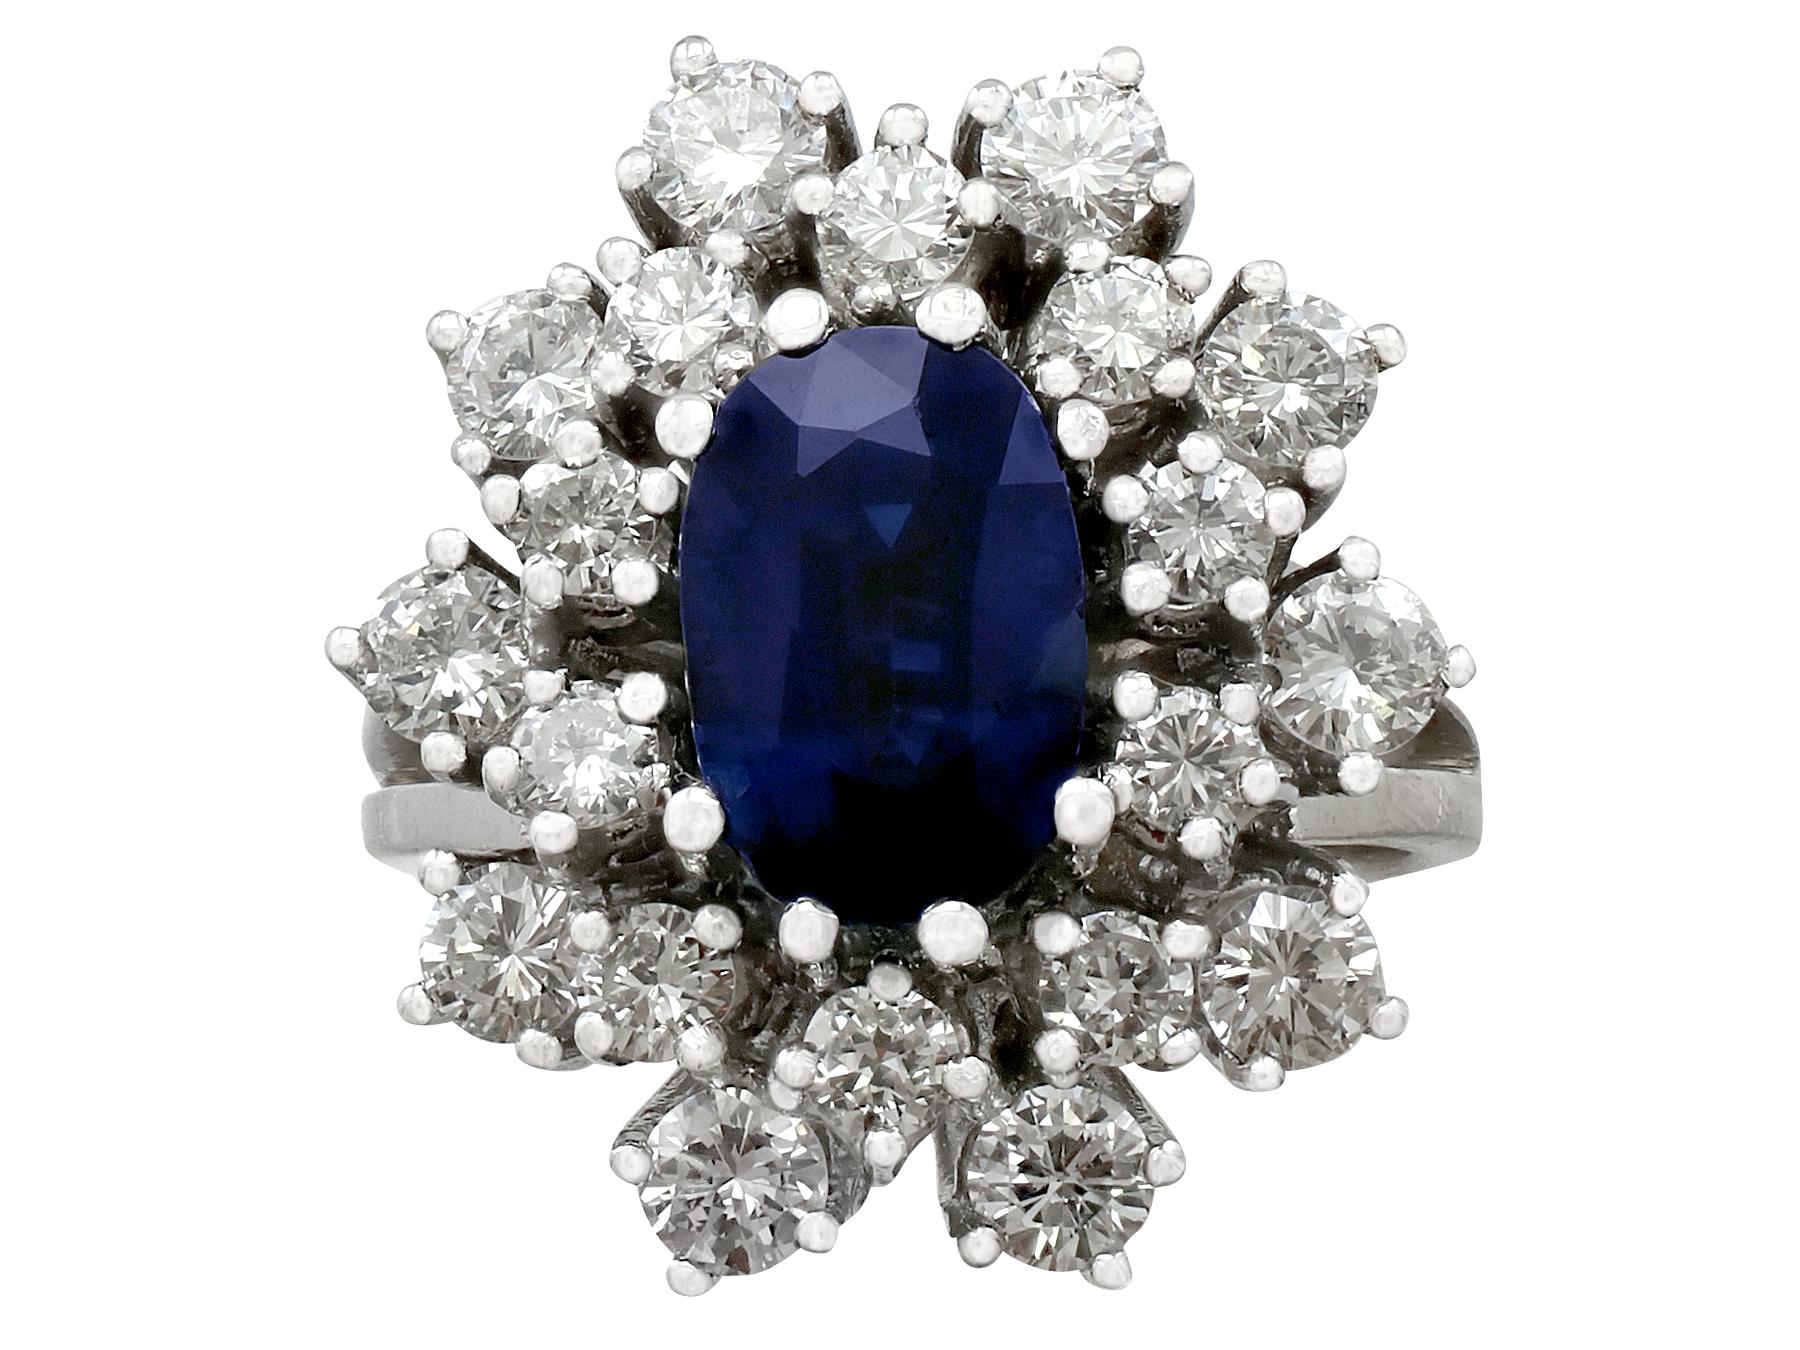 A stunning vintage 2.20 carat sapphire and 2.54 carat diamond, 14 karat white gold dress ring; part of our diverse vintage estate jewelry collections.

This stunning, fine and impressive vintage sapphire and diamond cluster ring has been crafted in